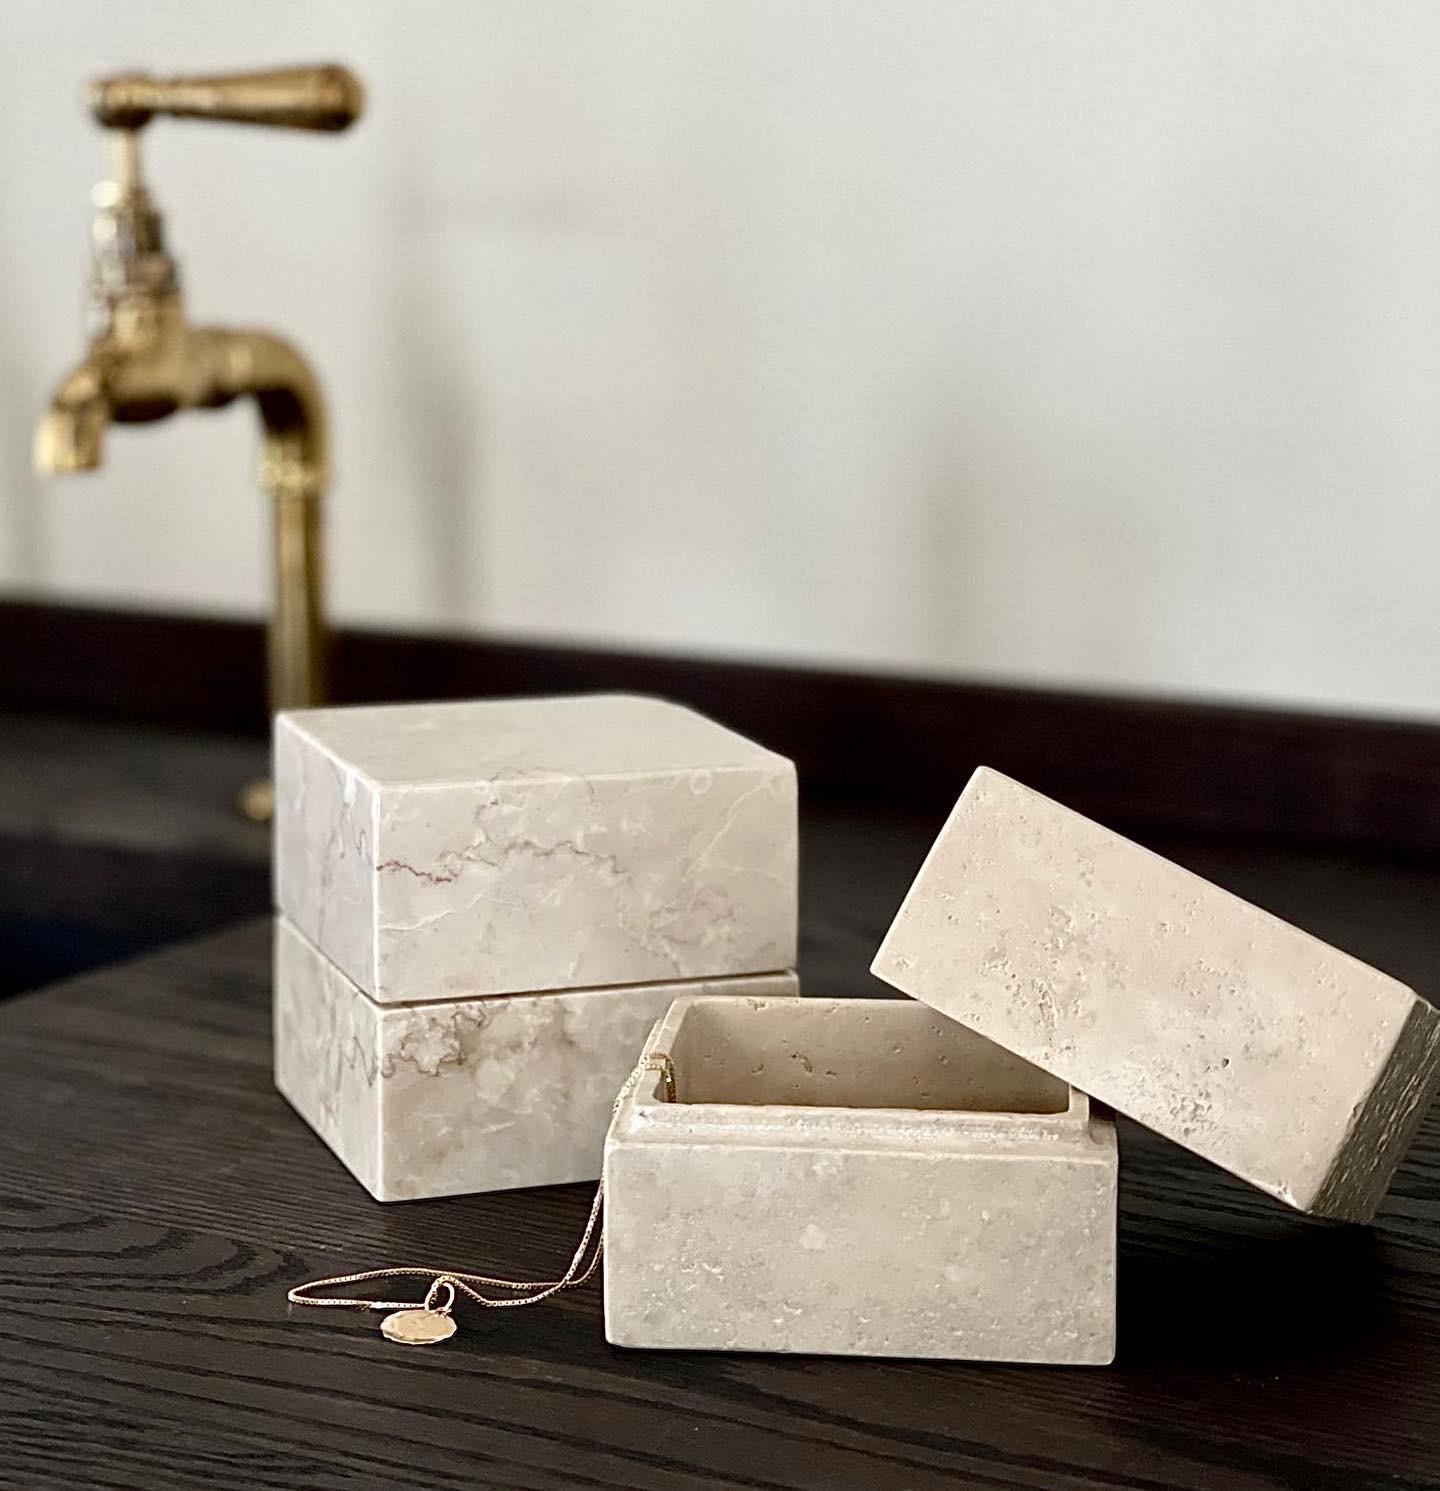 A limited production, functional object d'art exclusively produced by Anastasio Home.

The 50/50 is a perfectly imperfect four inch cube box, cut from a single piece of solid stone, and hand-finished by artisans in a growing stone atelier in